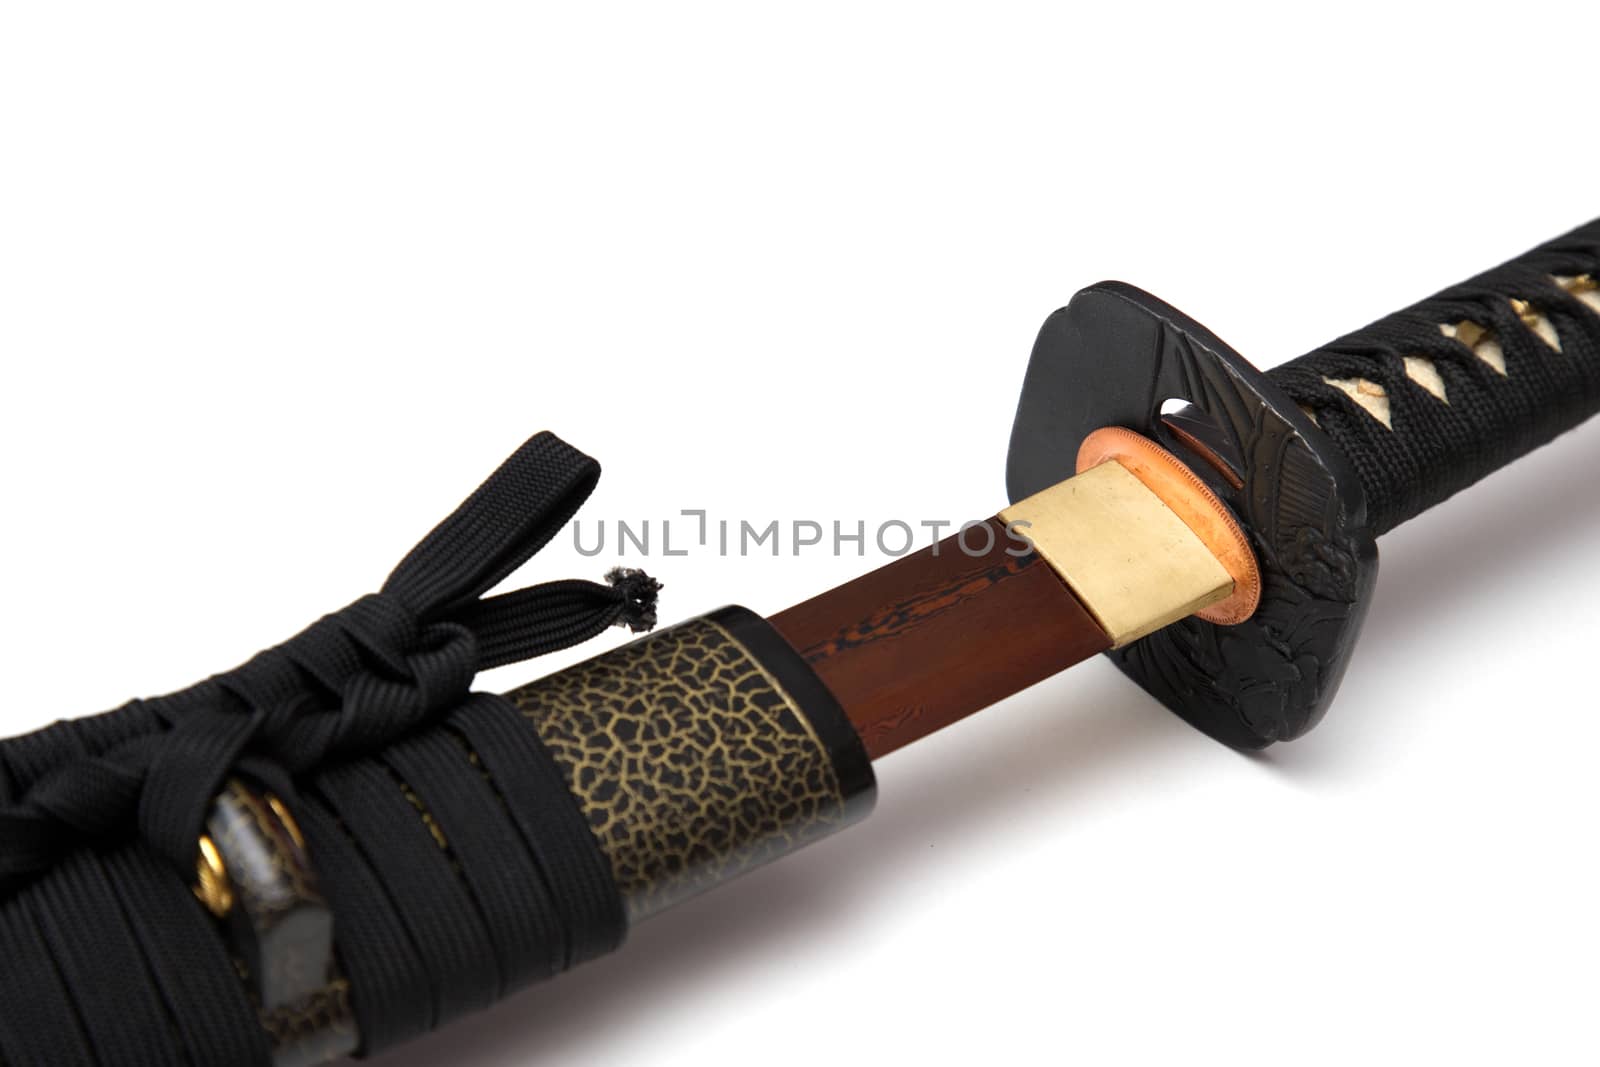 Red blade Japanese sword  black cord with  full textured scabbard  isolated in white background. by joker3753